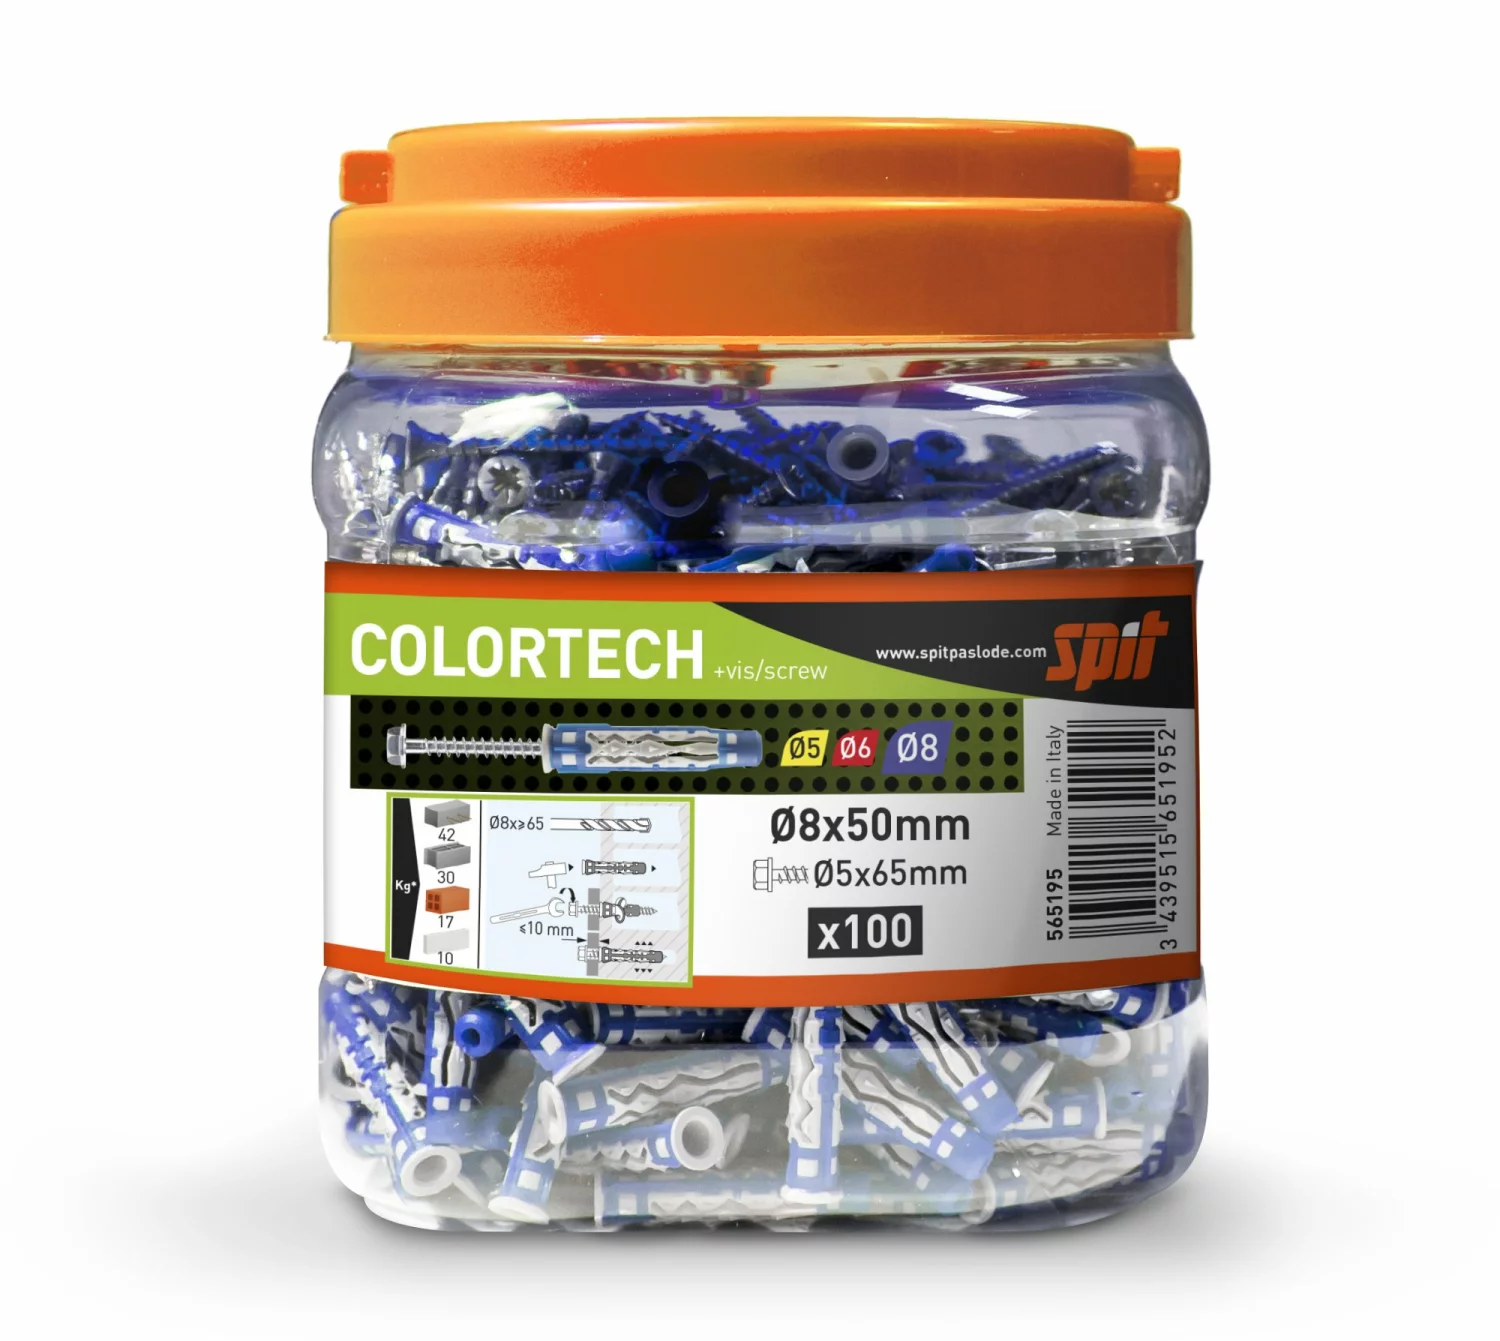 Spit 565195 Colortech Uni Plug 8X50 Met Schroef In Can (100St)